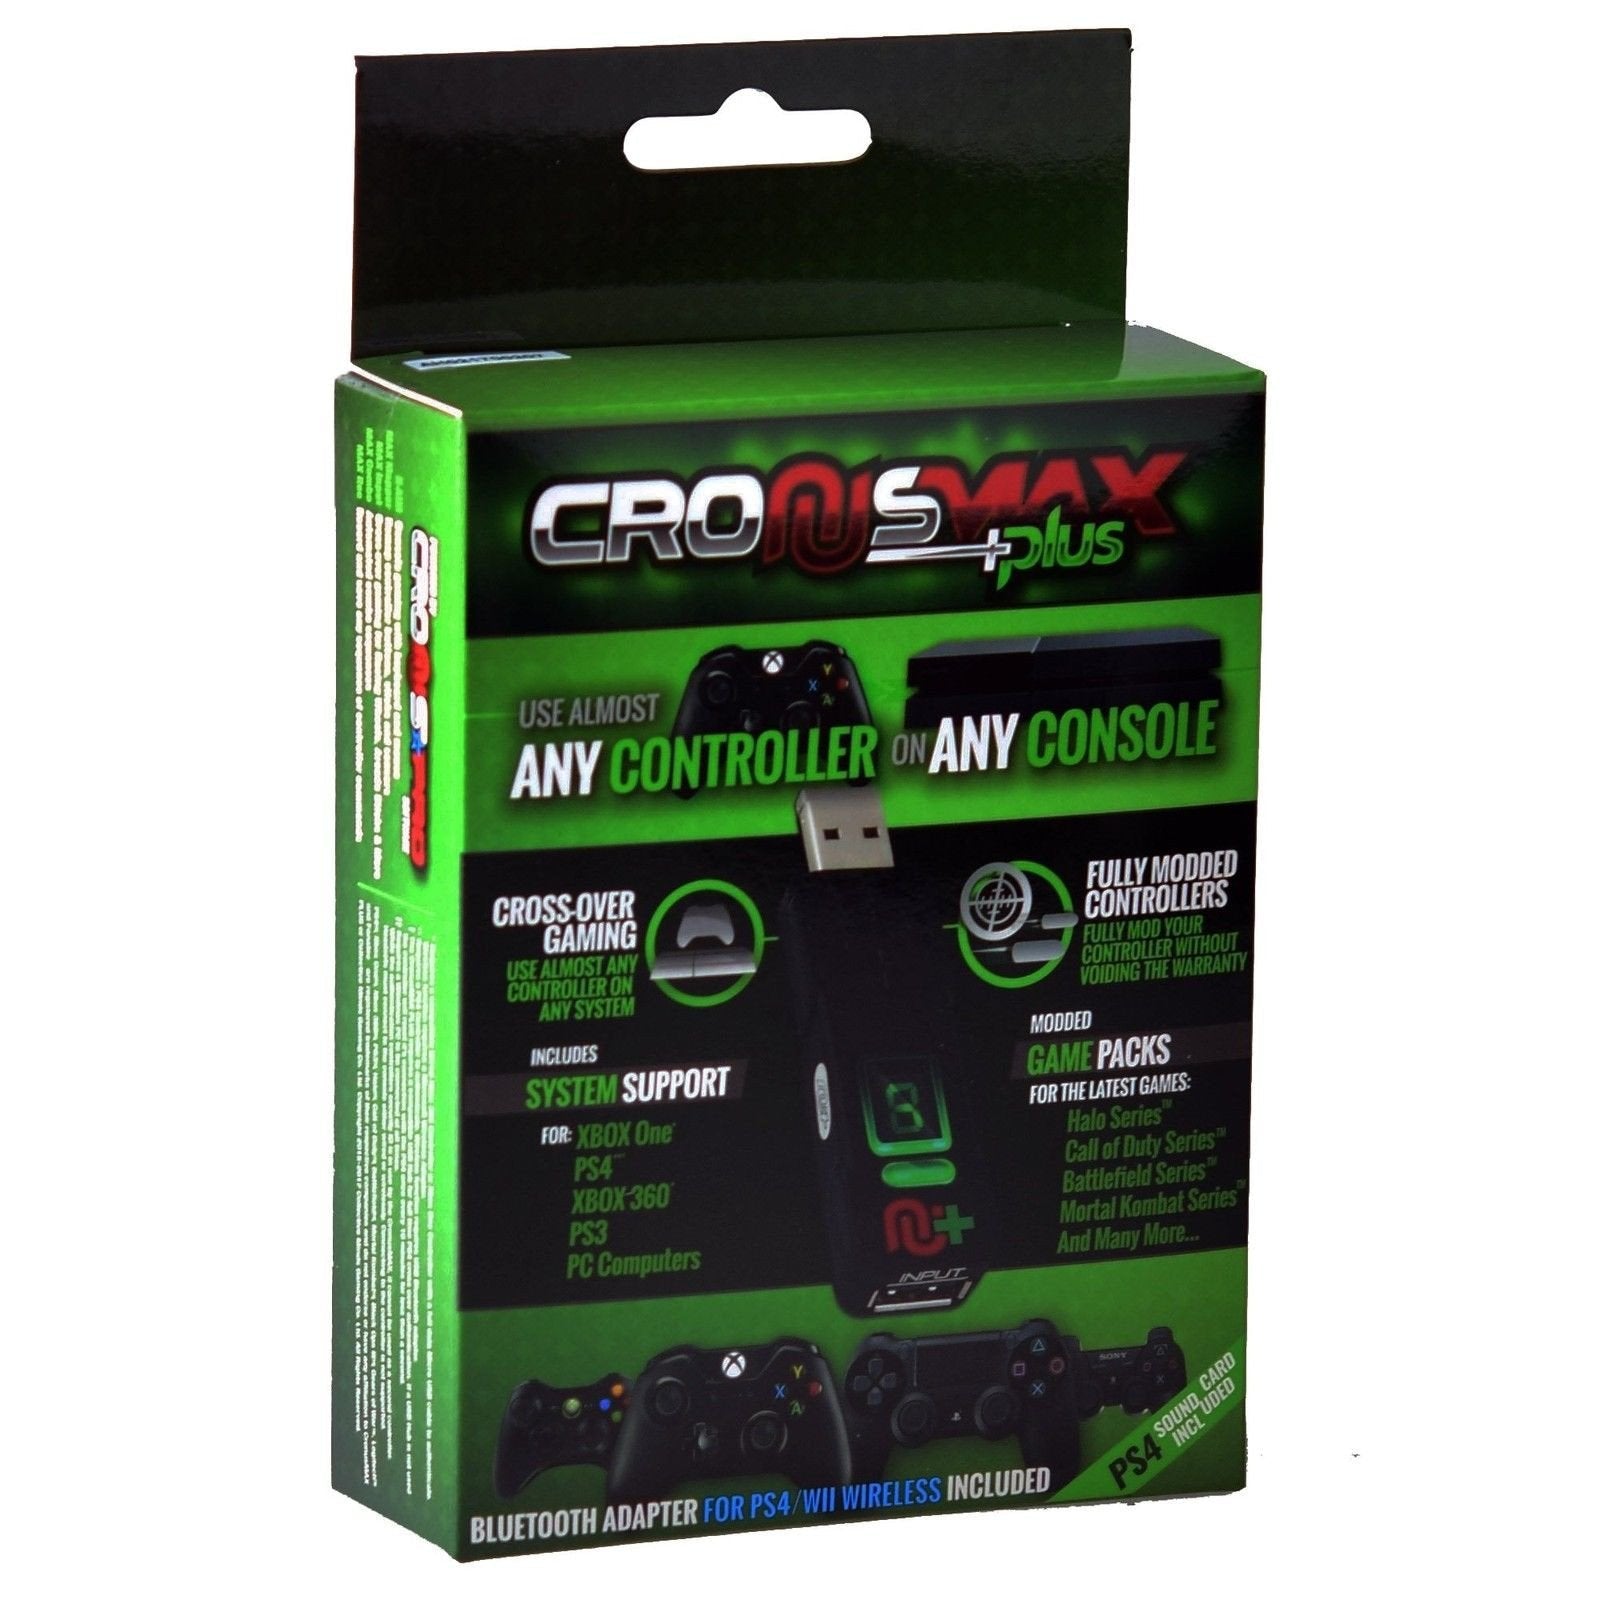 Gaming-CronusMax Plus Gaming Adapter for PS4 Xbox One PS3 Xbox 360 with Add On Pack